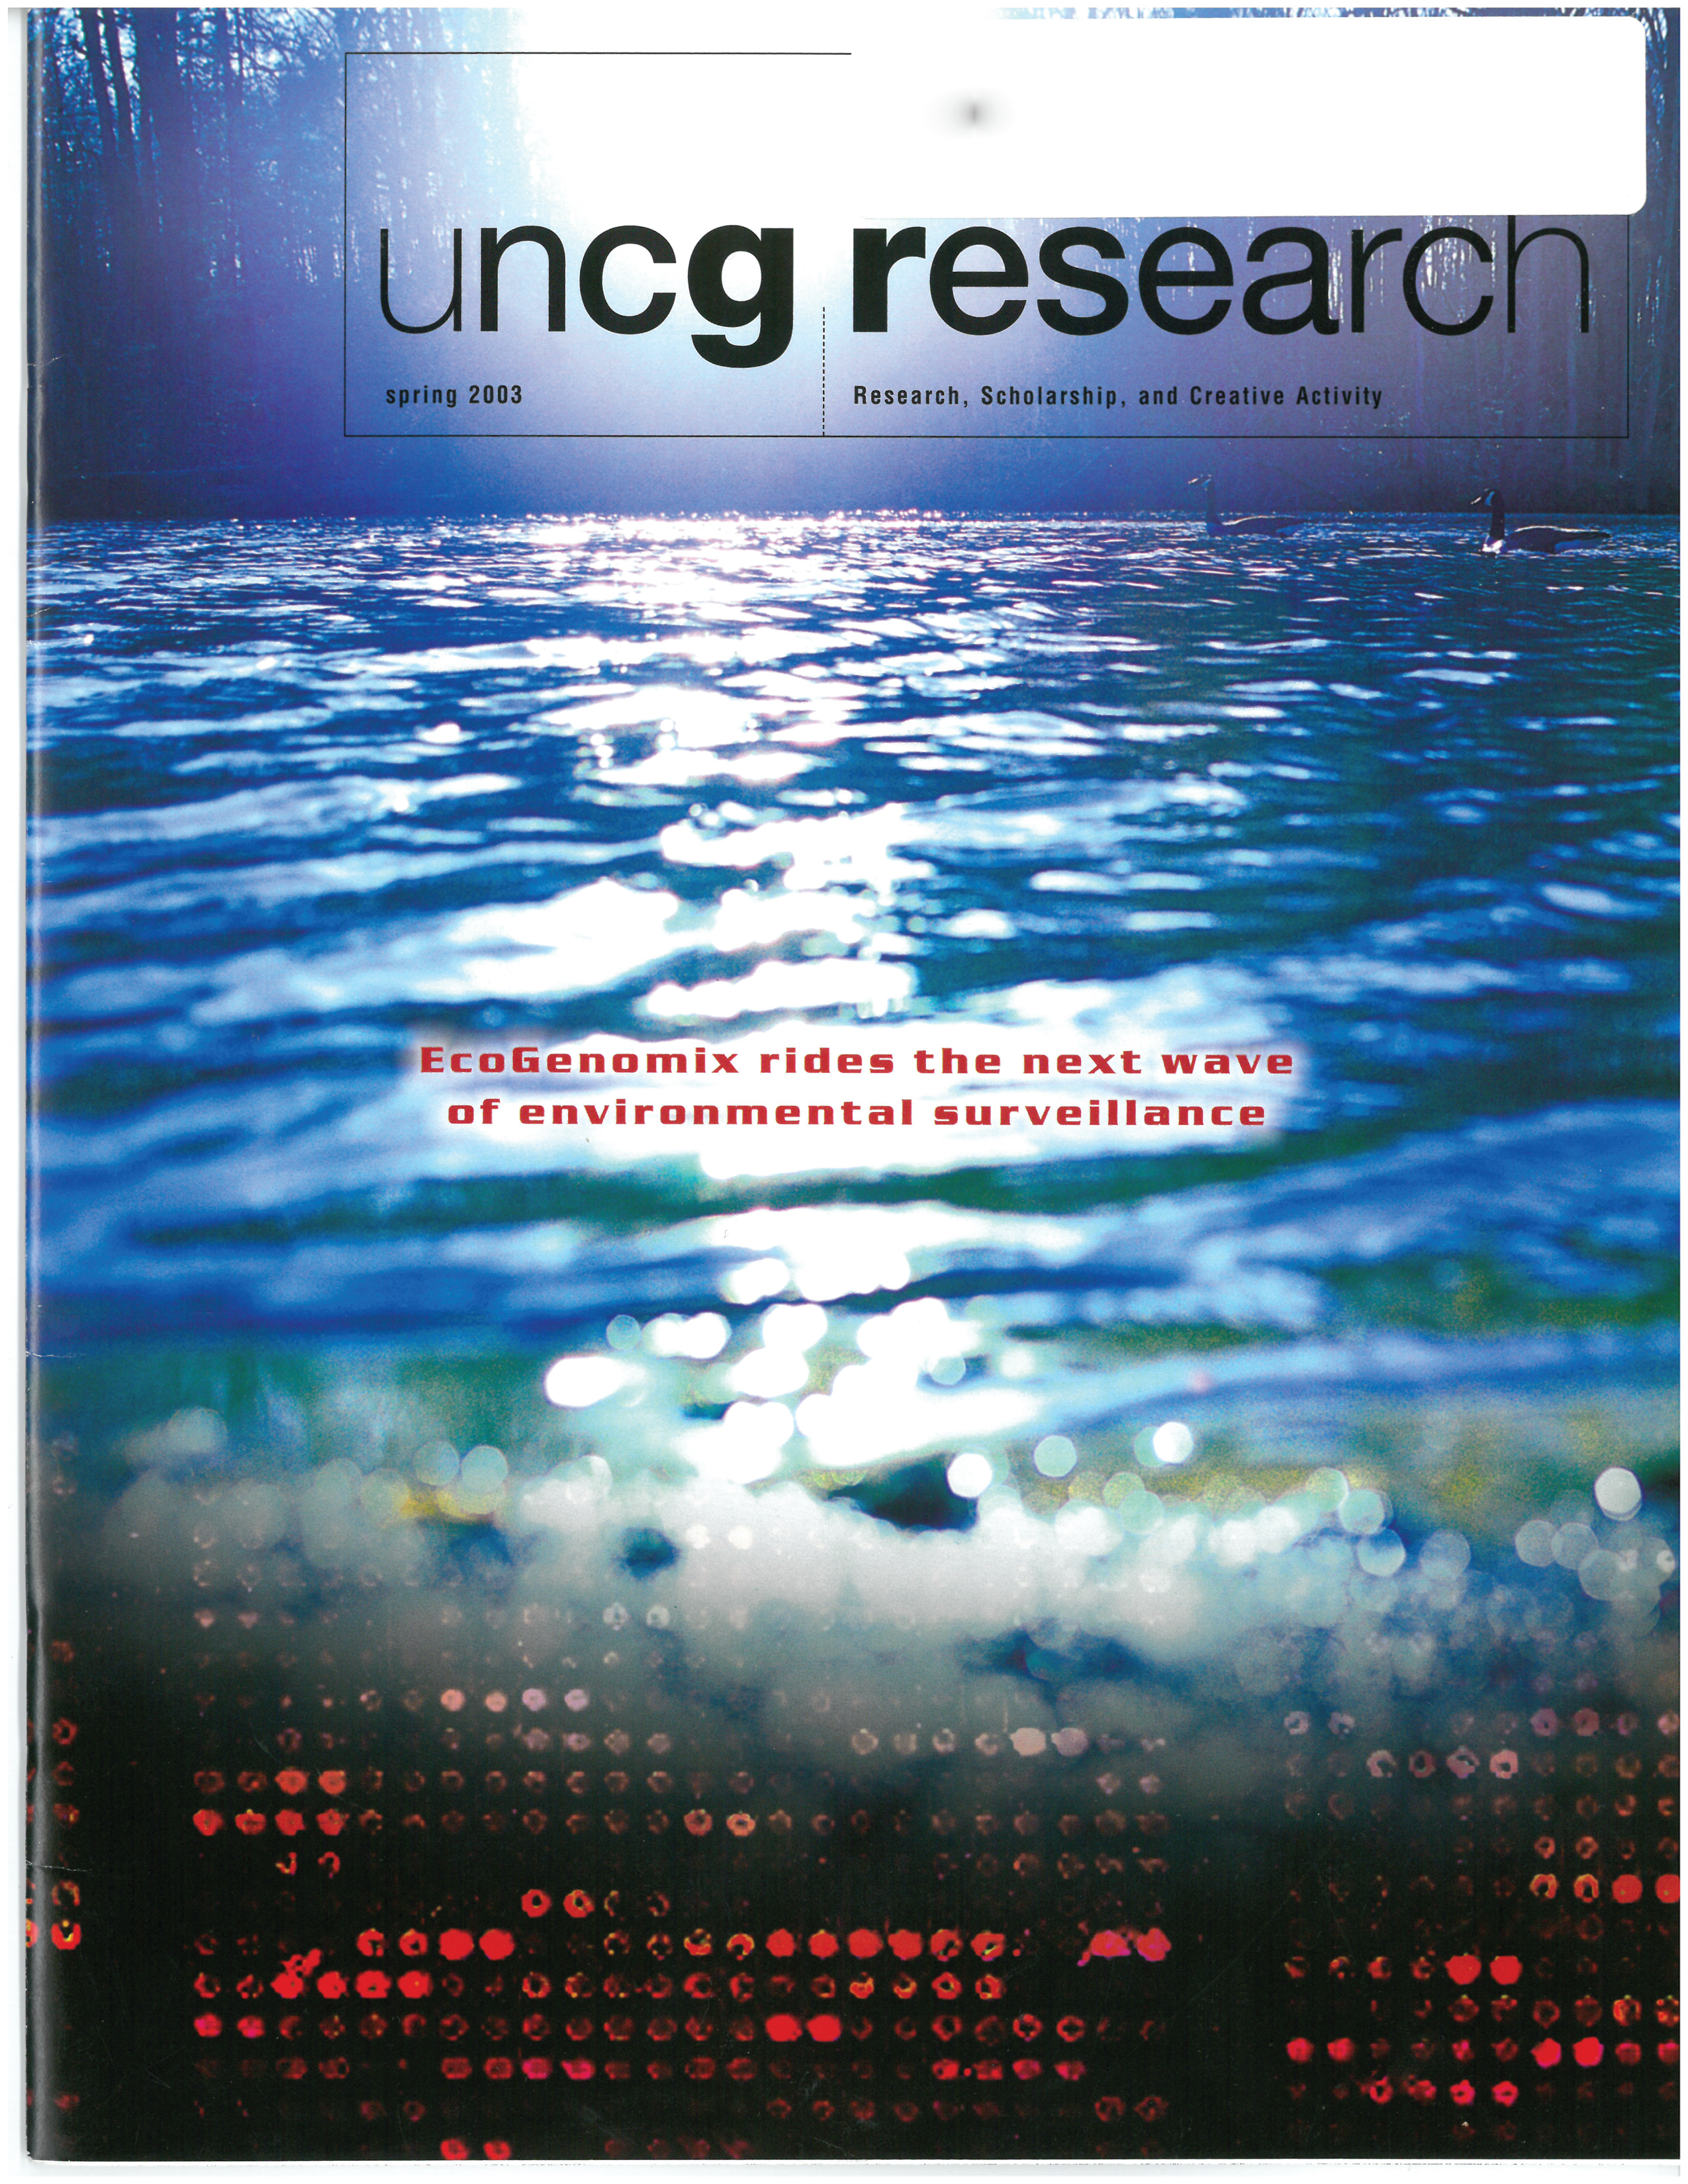 Cover of UNCG's Spring 2003 Research Magazine